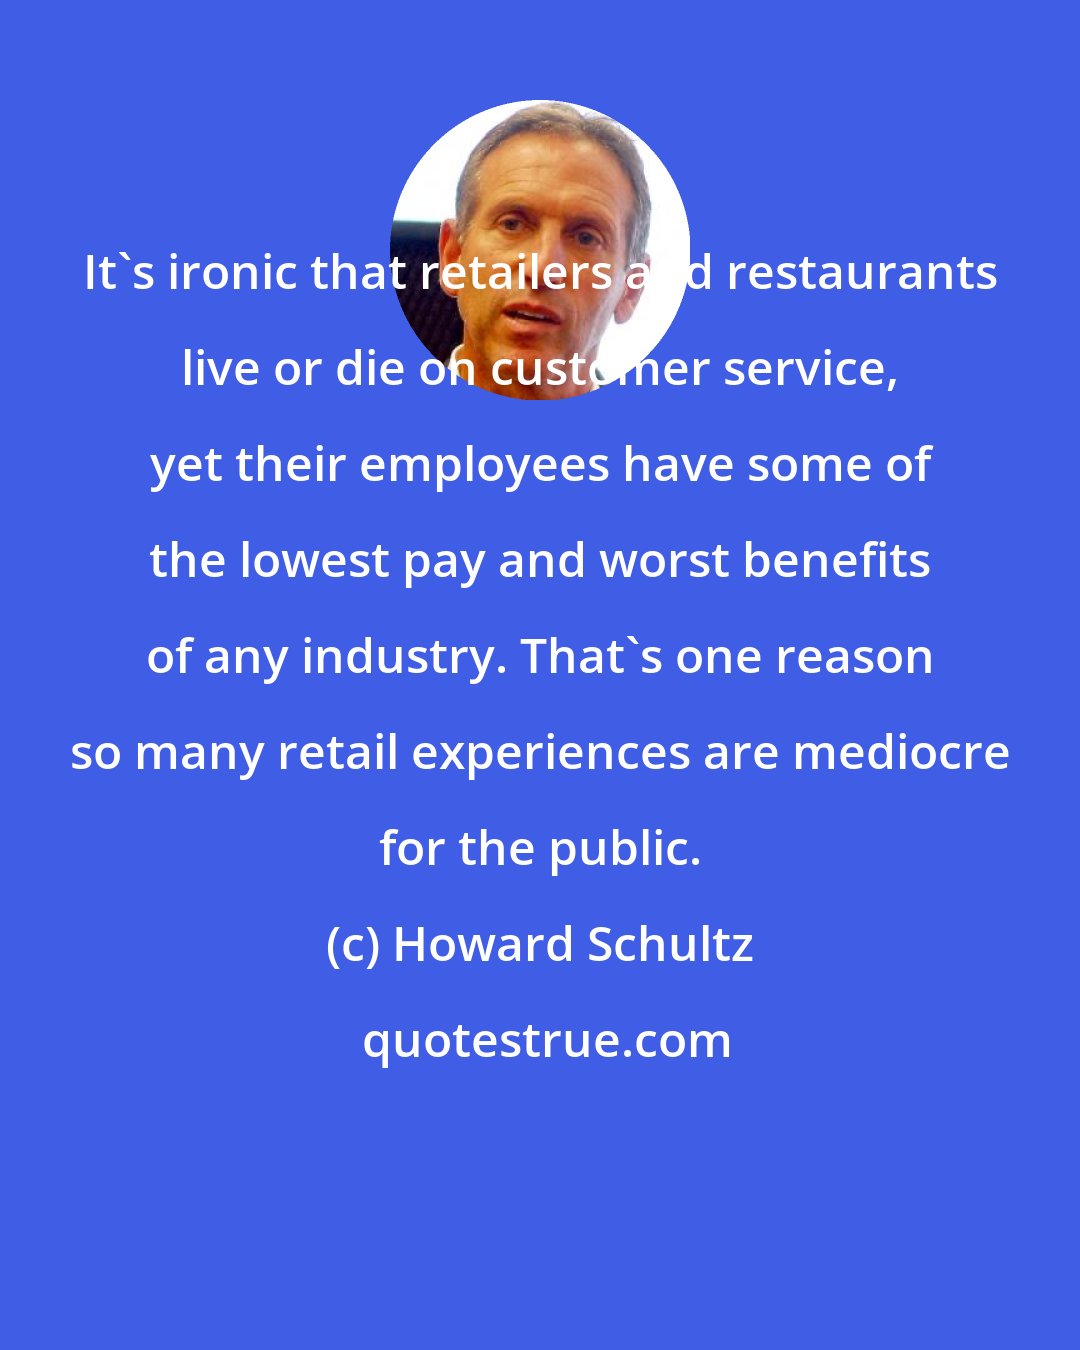 Howard Schultz: It's ironic that retailers and restaurants live or die on customer service, yet their employees have some of the lowest pay and worst benefits of any industry. That's one reason so many retail experiences are mediocre for the public.